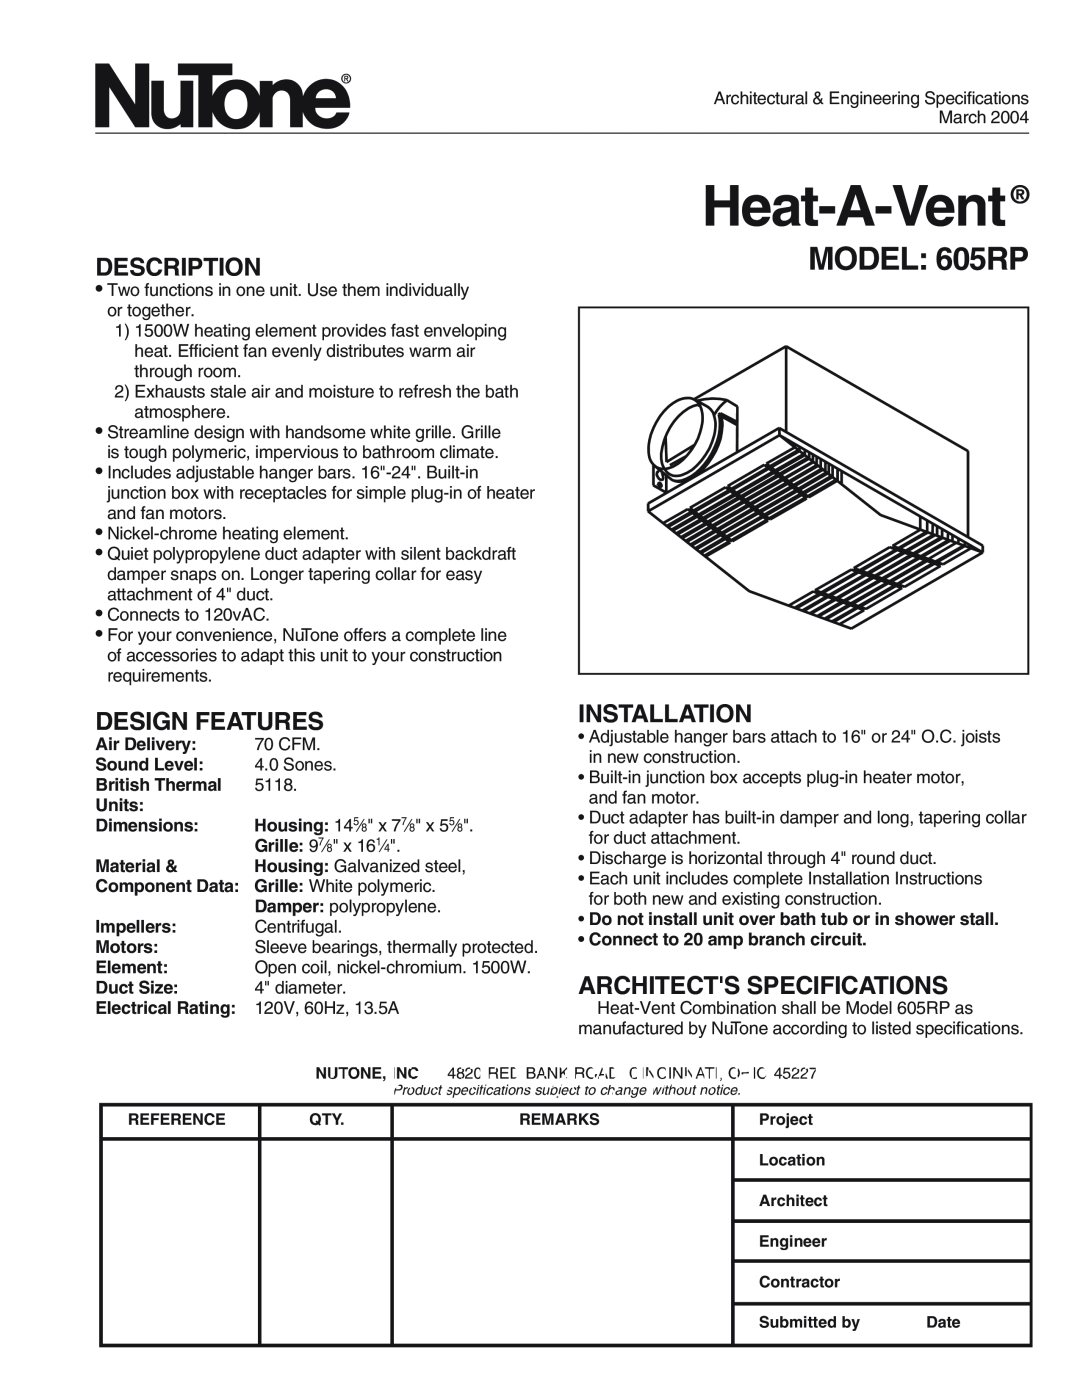 NuTone 605RP specifications Description, Design Features, Installation, Architects Specifications, Heat-A-Vent 